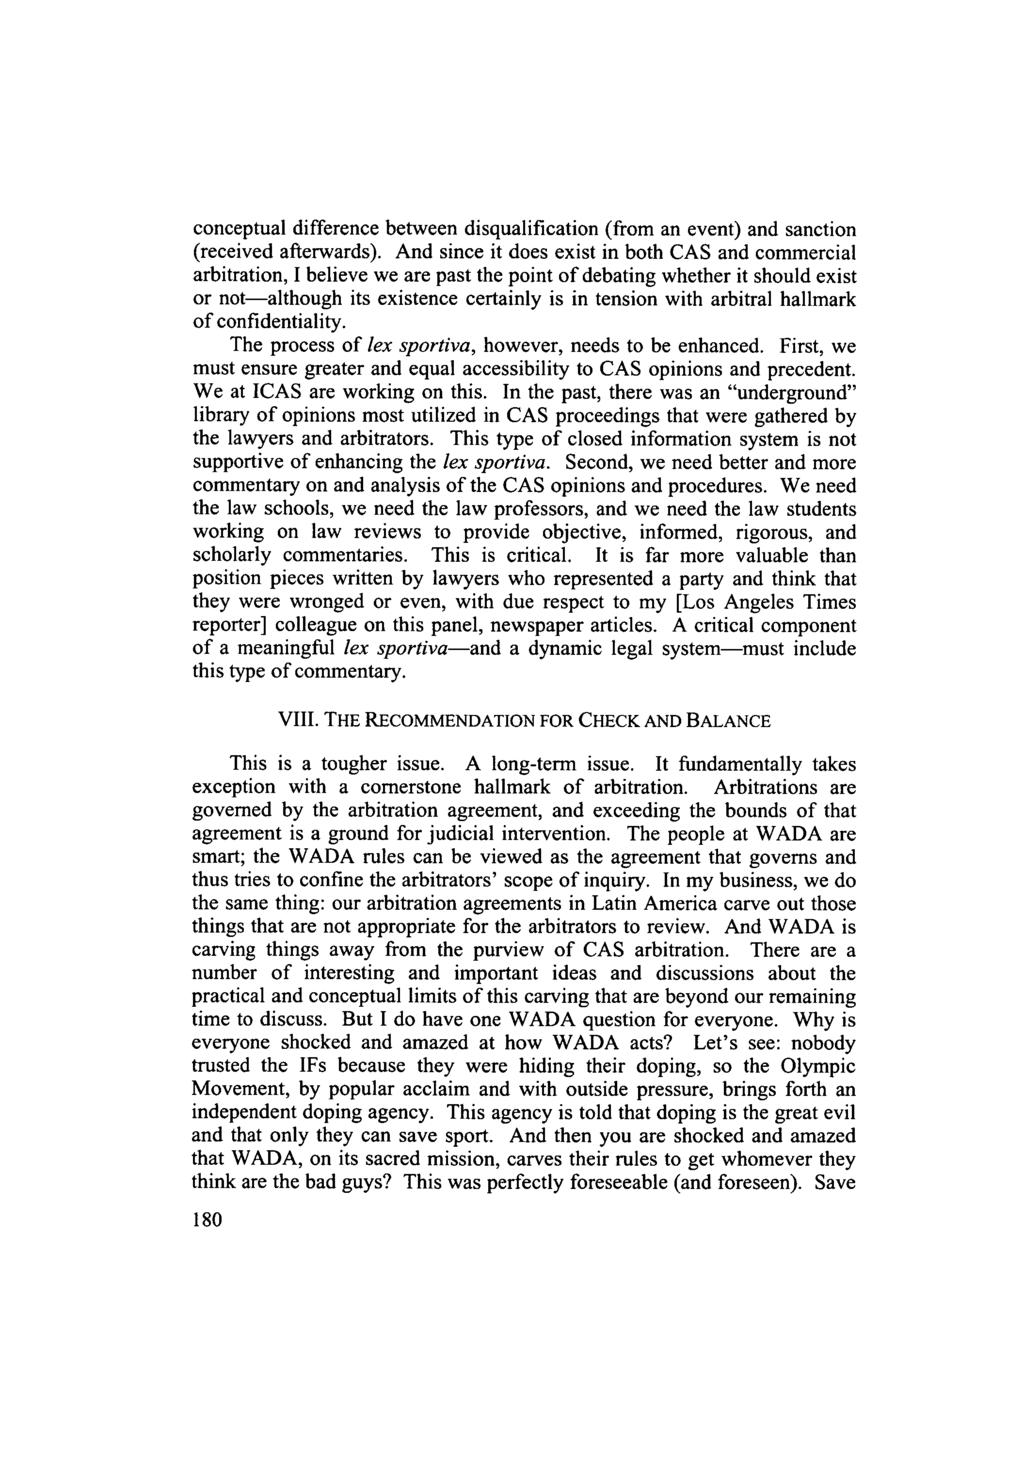 Pepperdine Dispute Resolution Law Journal, Vol. 10, Iss. 1 [2010], Art. 8 conceptual difference between disqualification (from an event) and sanction (received afterwards).